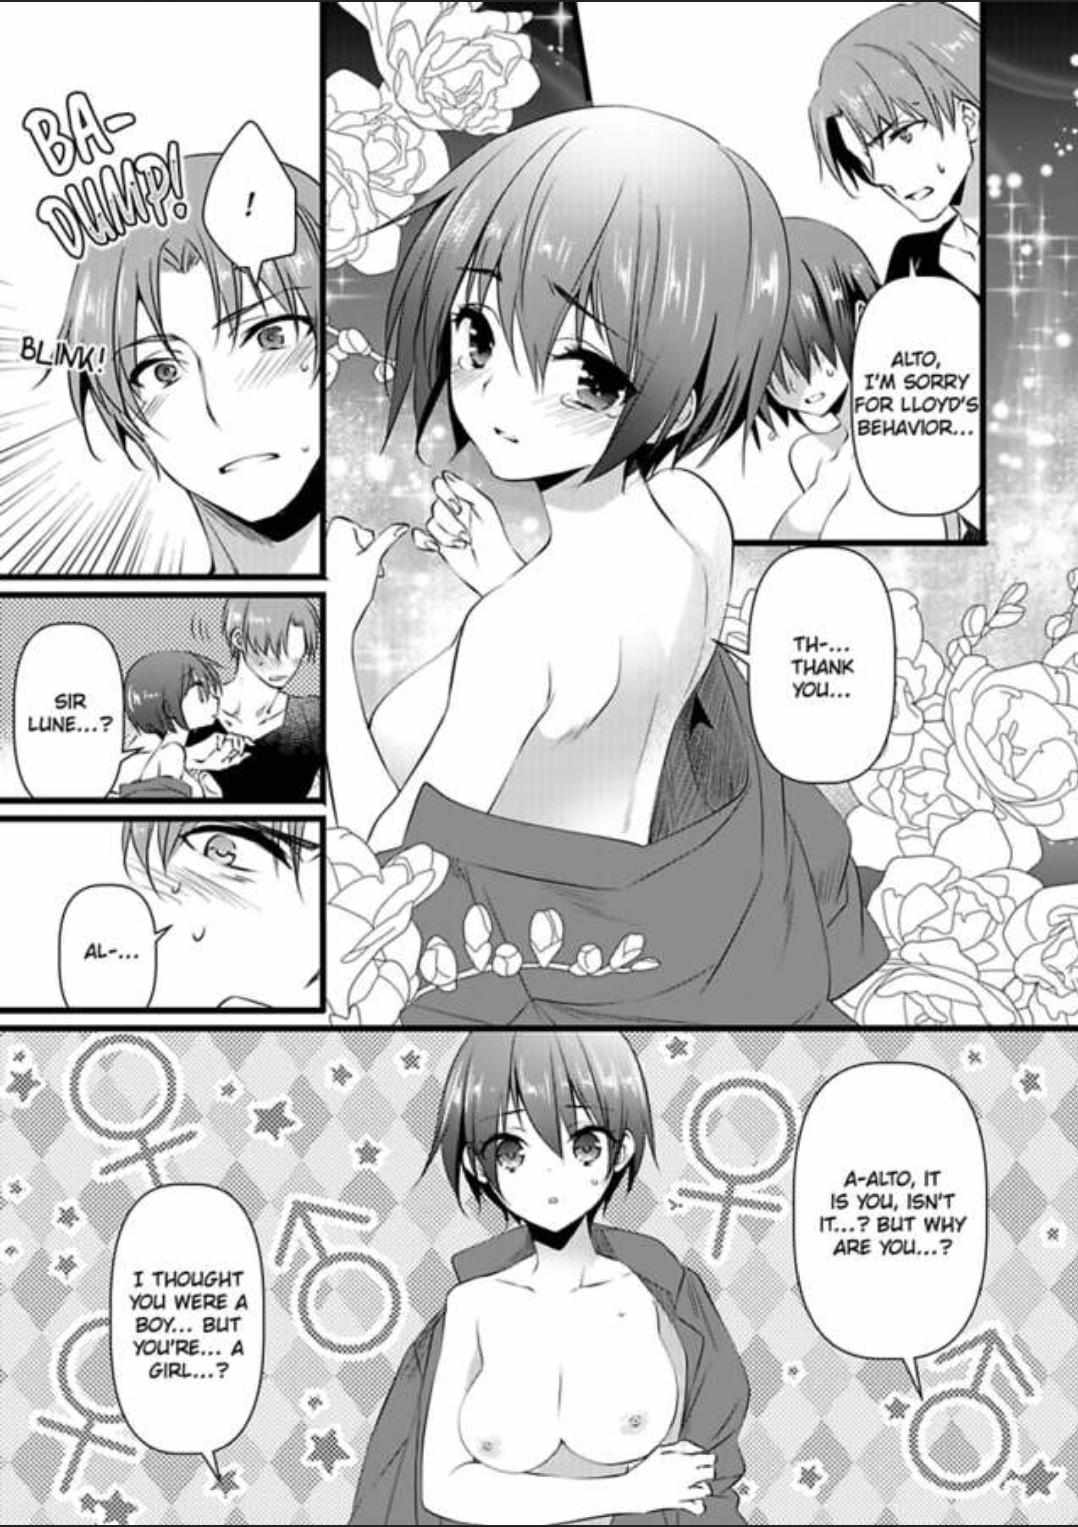 I Turned into a Girl and Turned on All the Knights! -I Need to Have Sex to Turn Back!- - chapter 6 - #5